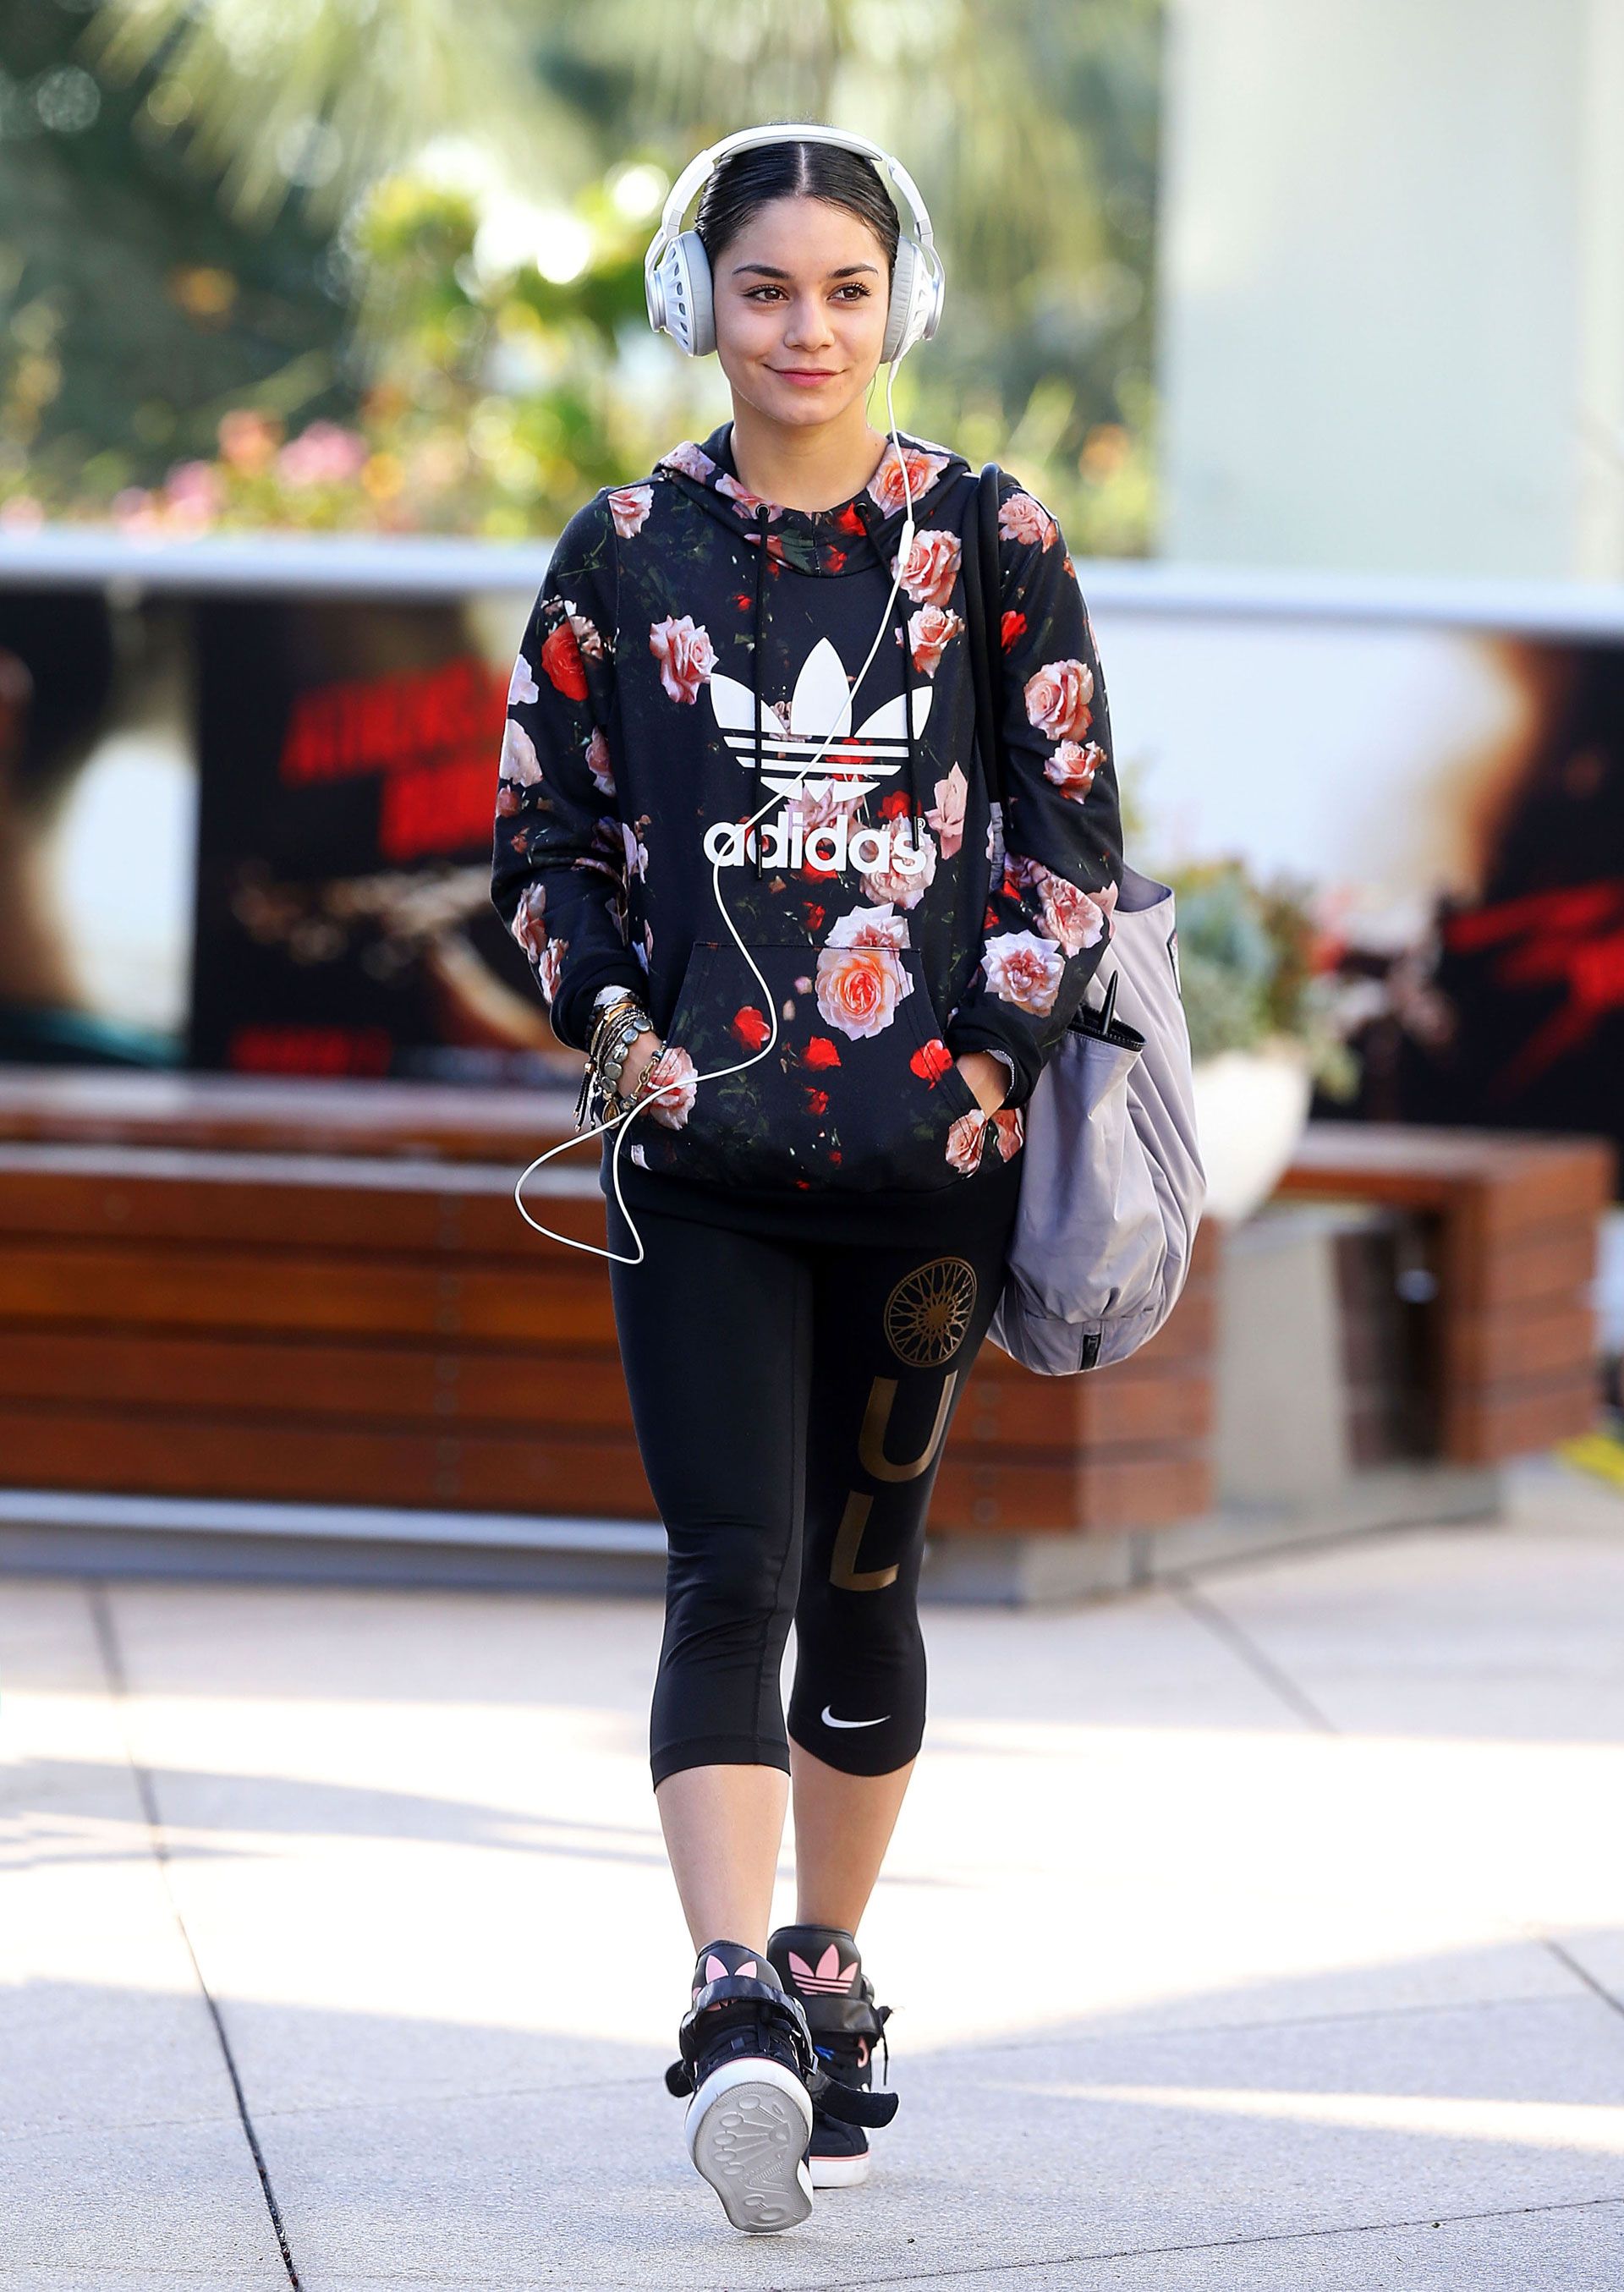 What To Wear to the Gym - Stylish Celebrity Workout Clothes